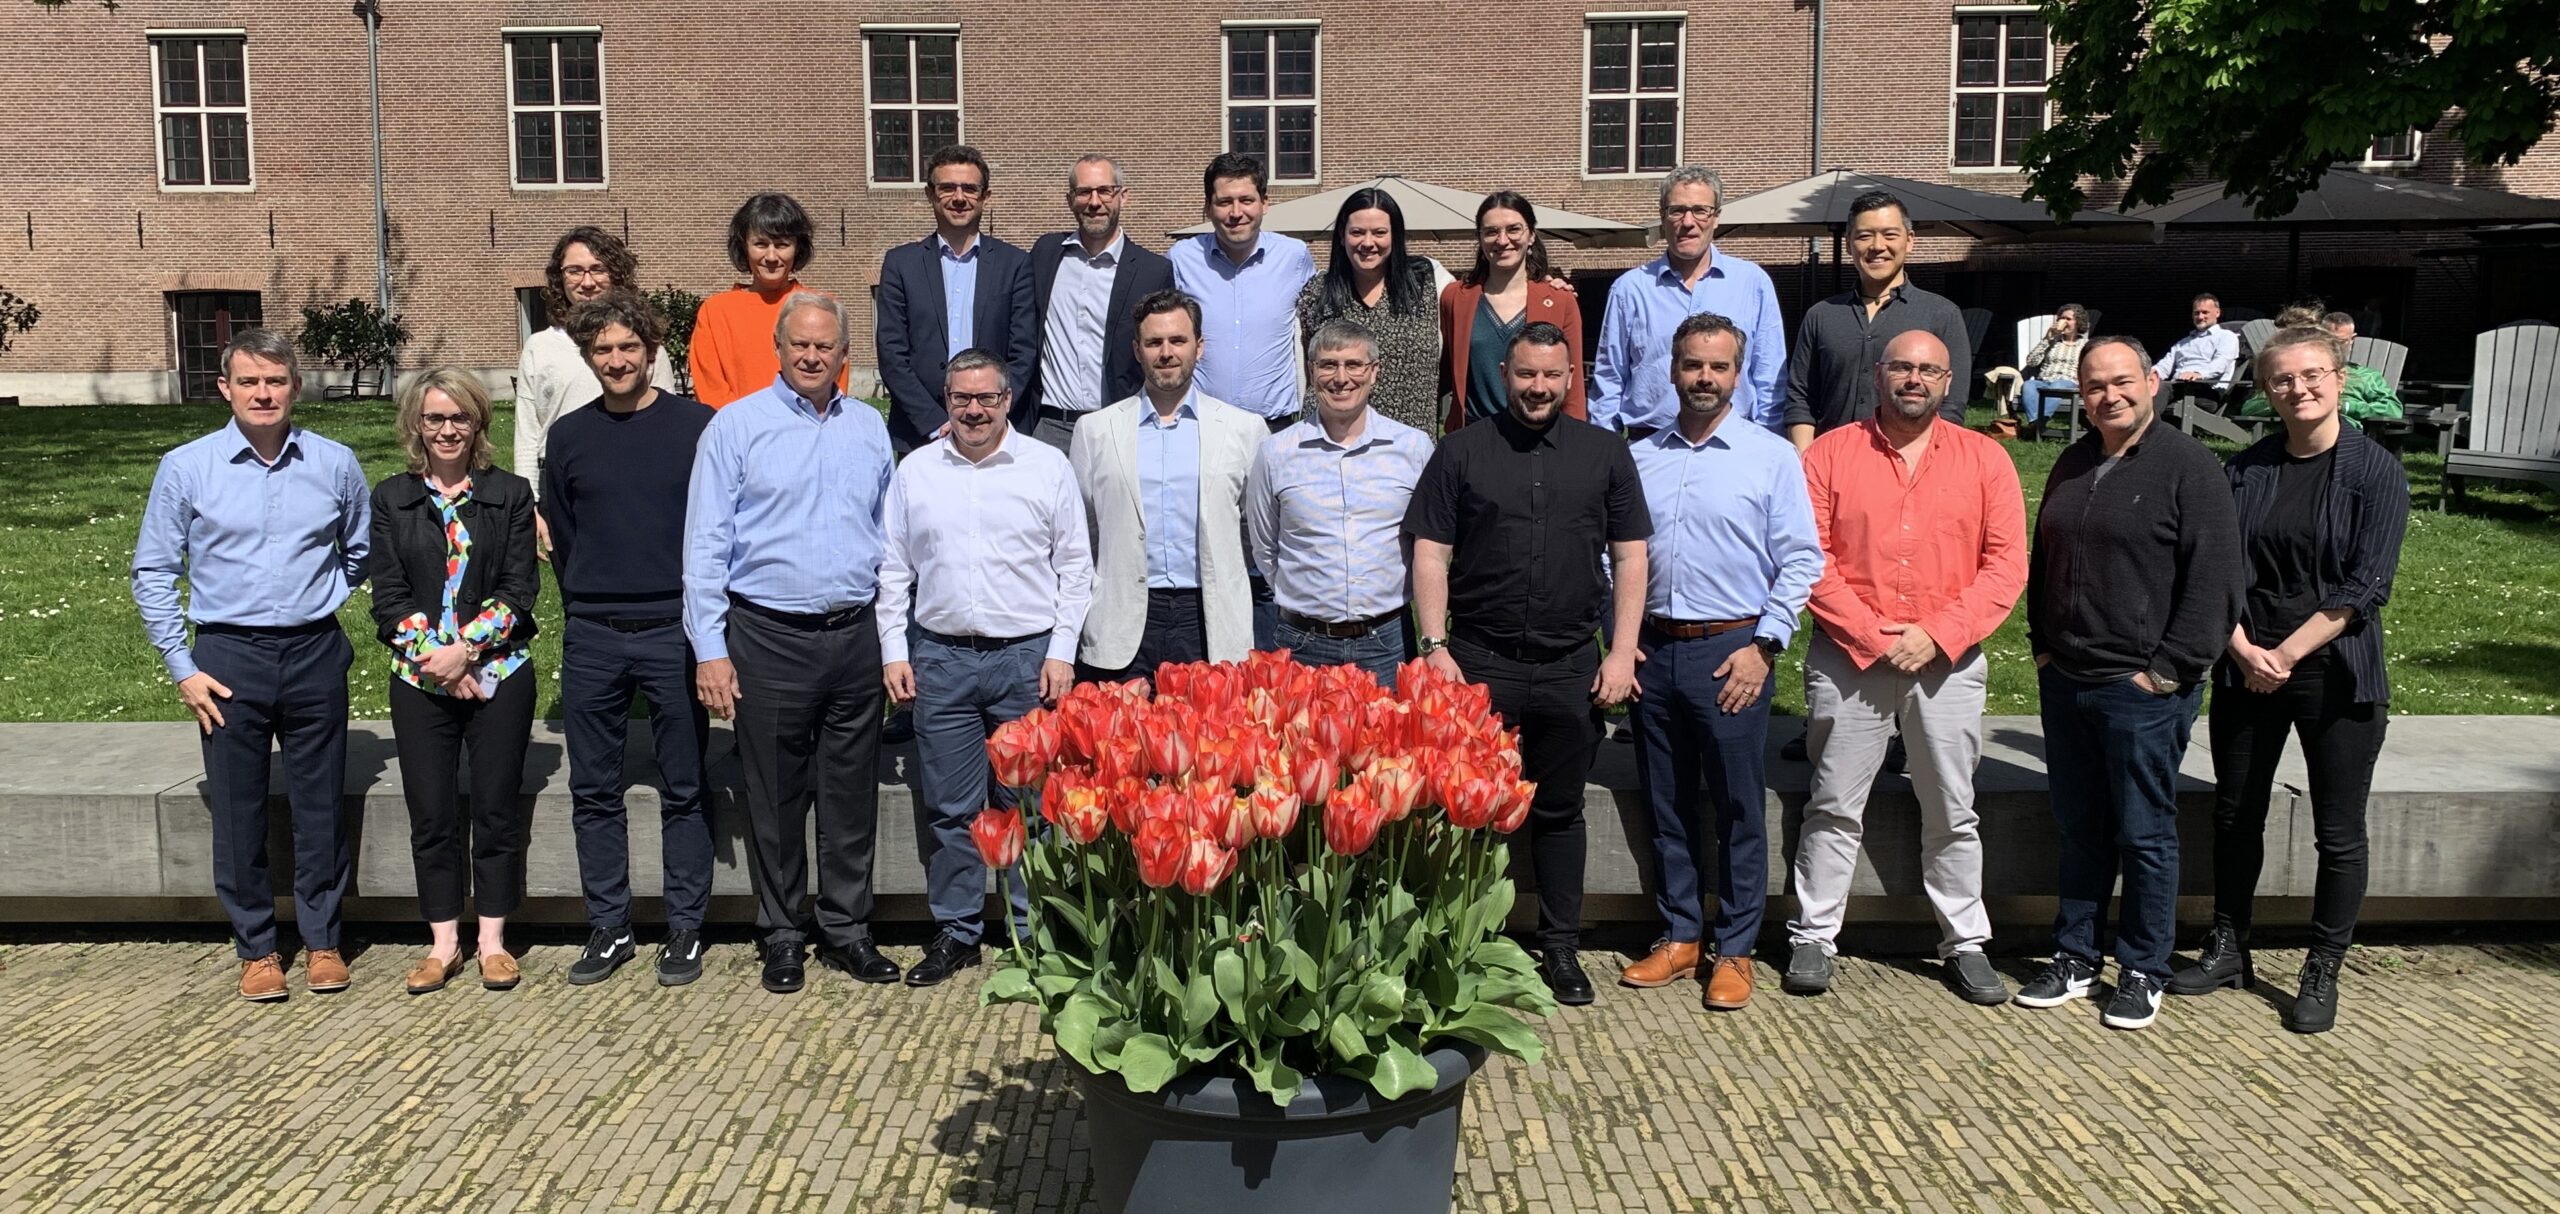 BIER members gathered in Amsterdam for annual meeting